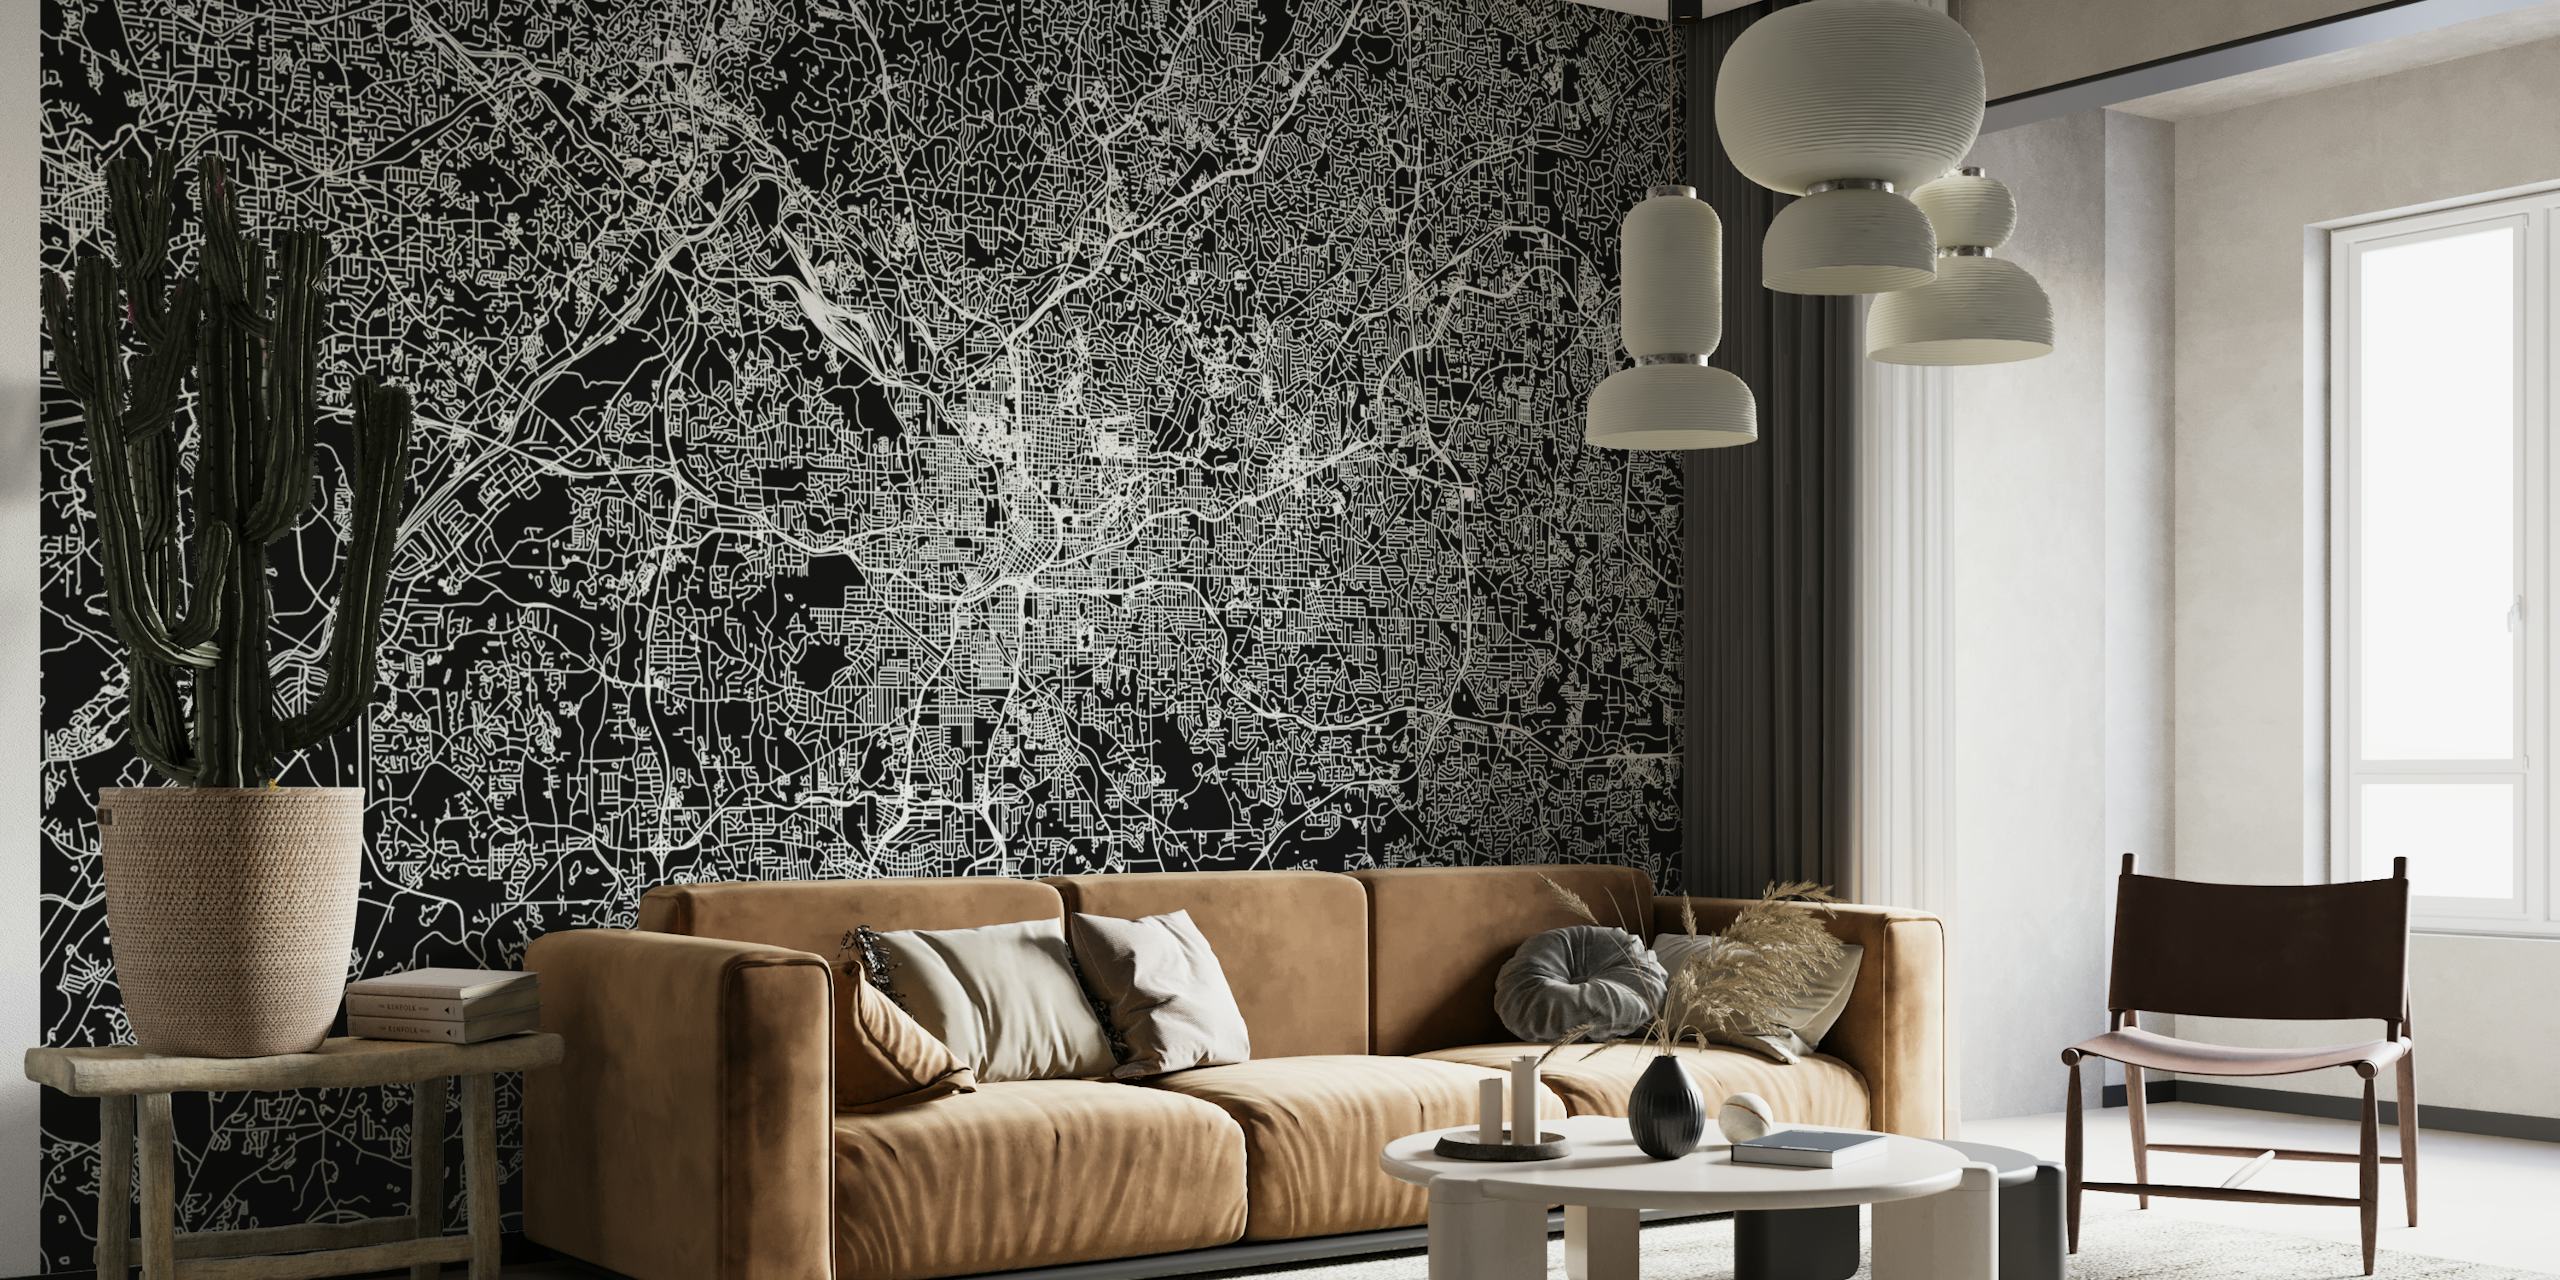 Stylish black and white map mural of Atlanta's city layout for modern interior decor.